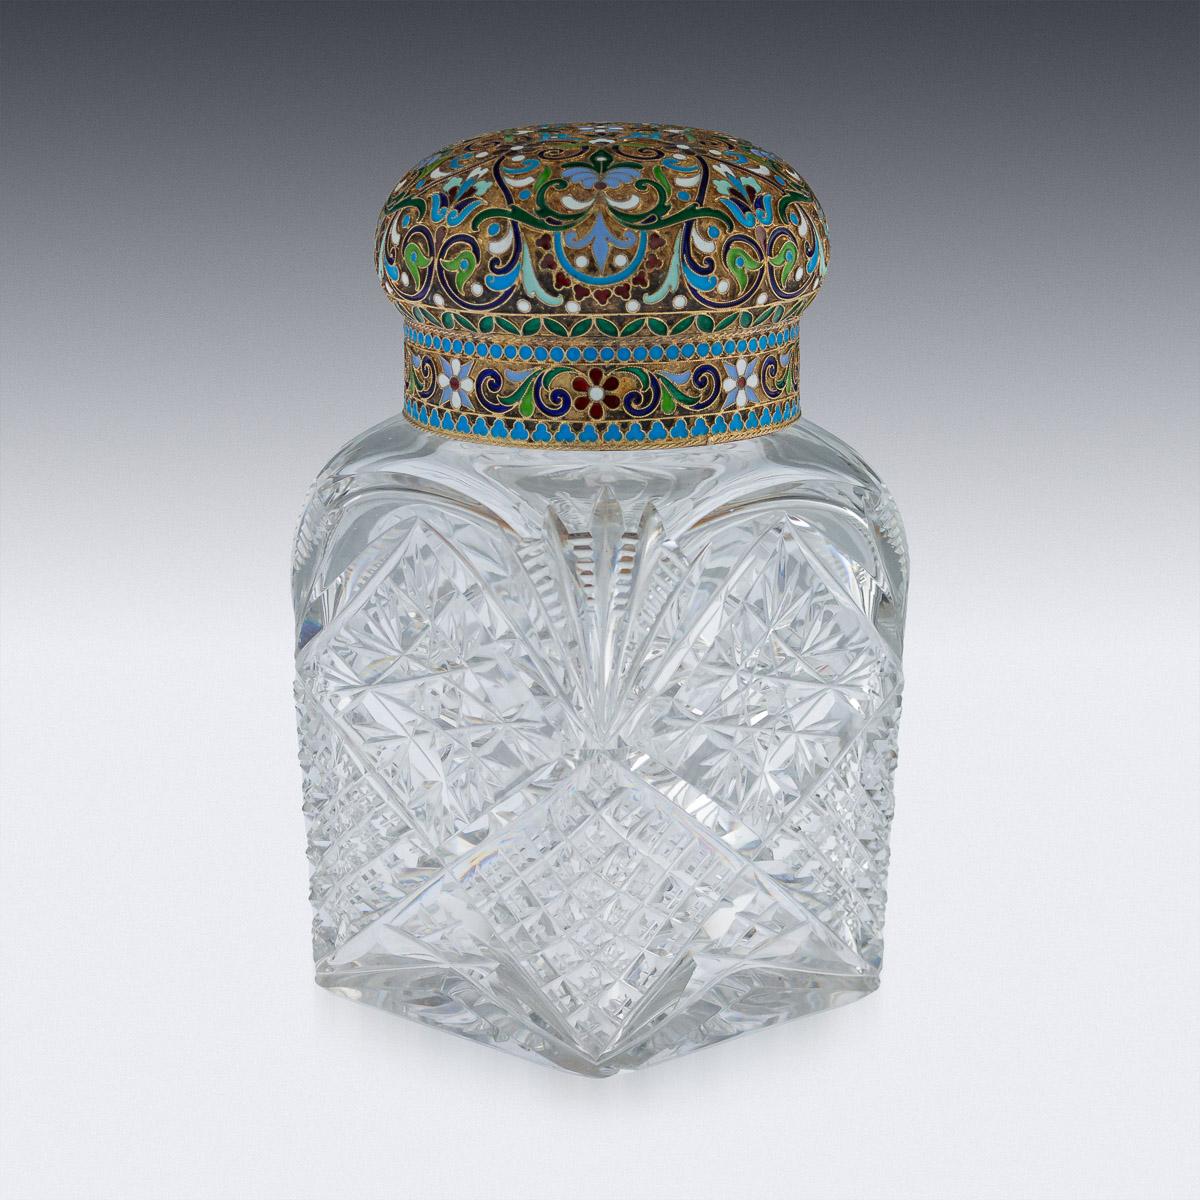 Antique early 20th century Russian solid silver-gilt, cloisonne enamel and cut glass large tea caddy, richly gilt, cut glass container of square form mounted with a traditional button shaped pull of lid decorated with traditional Russian scrolls and